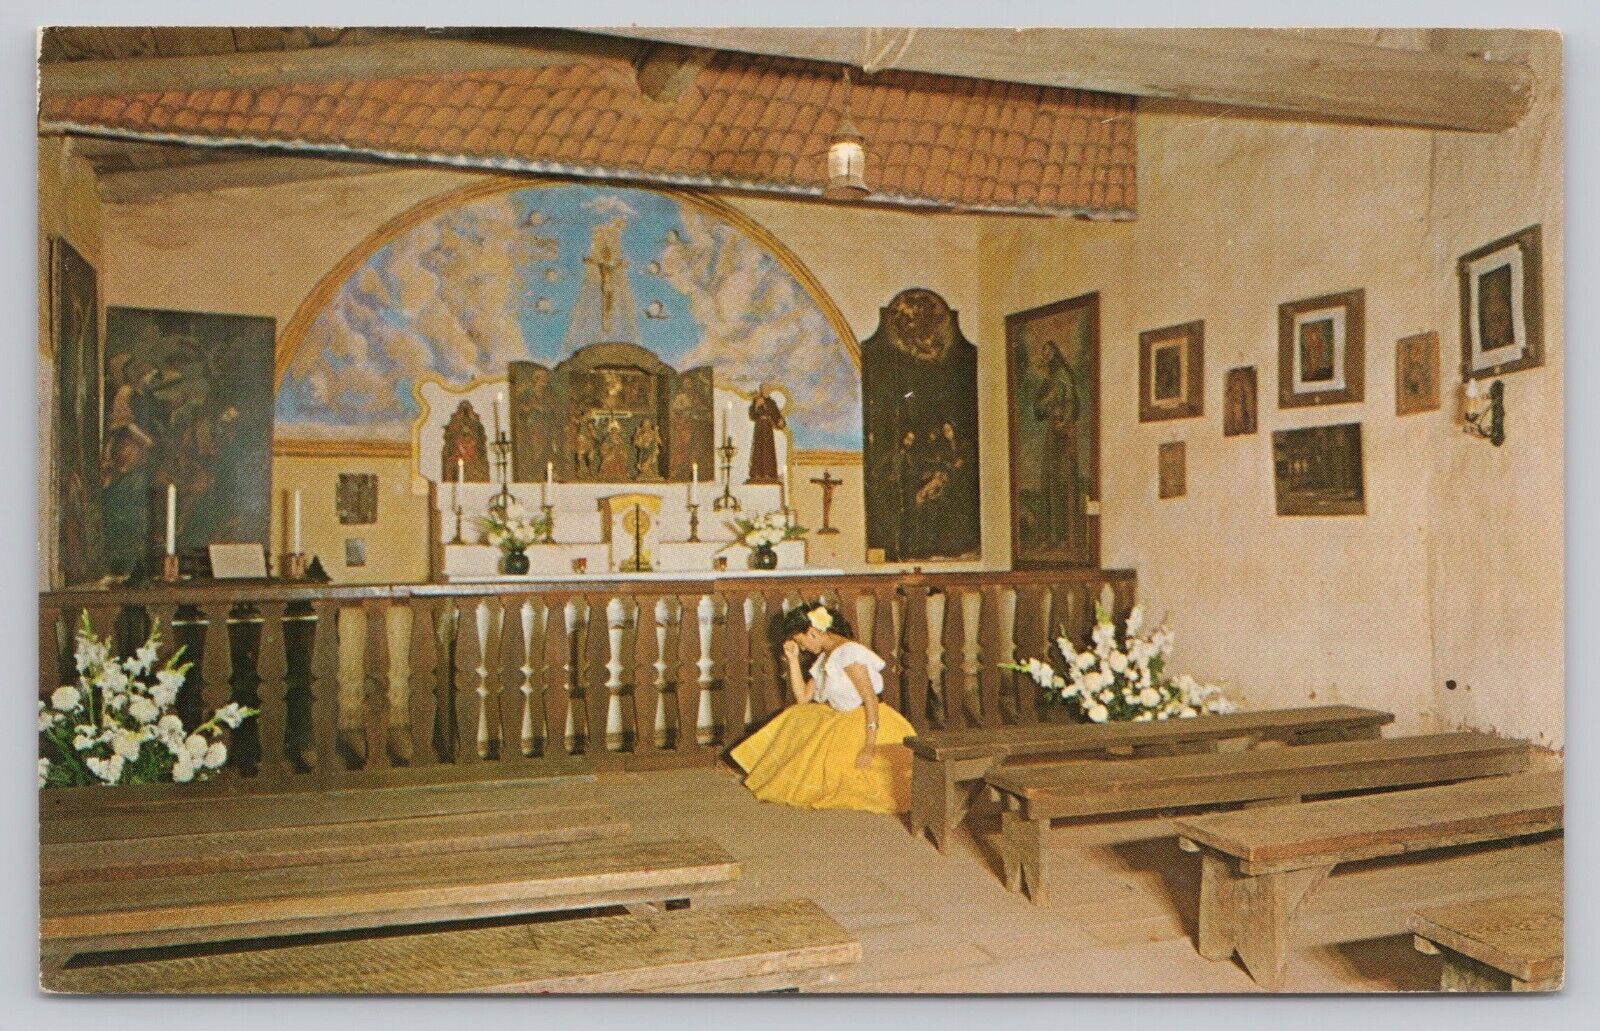 San Diego California, Ramona's Marriage Place Chapel, Old Town, Vintage Postcard